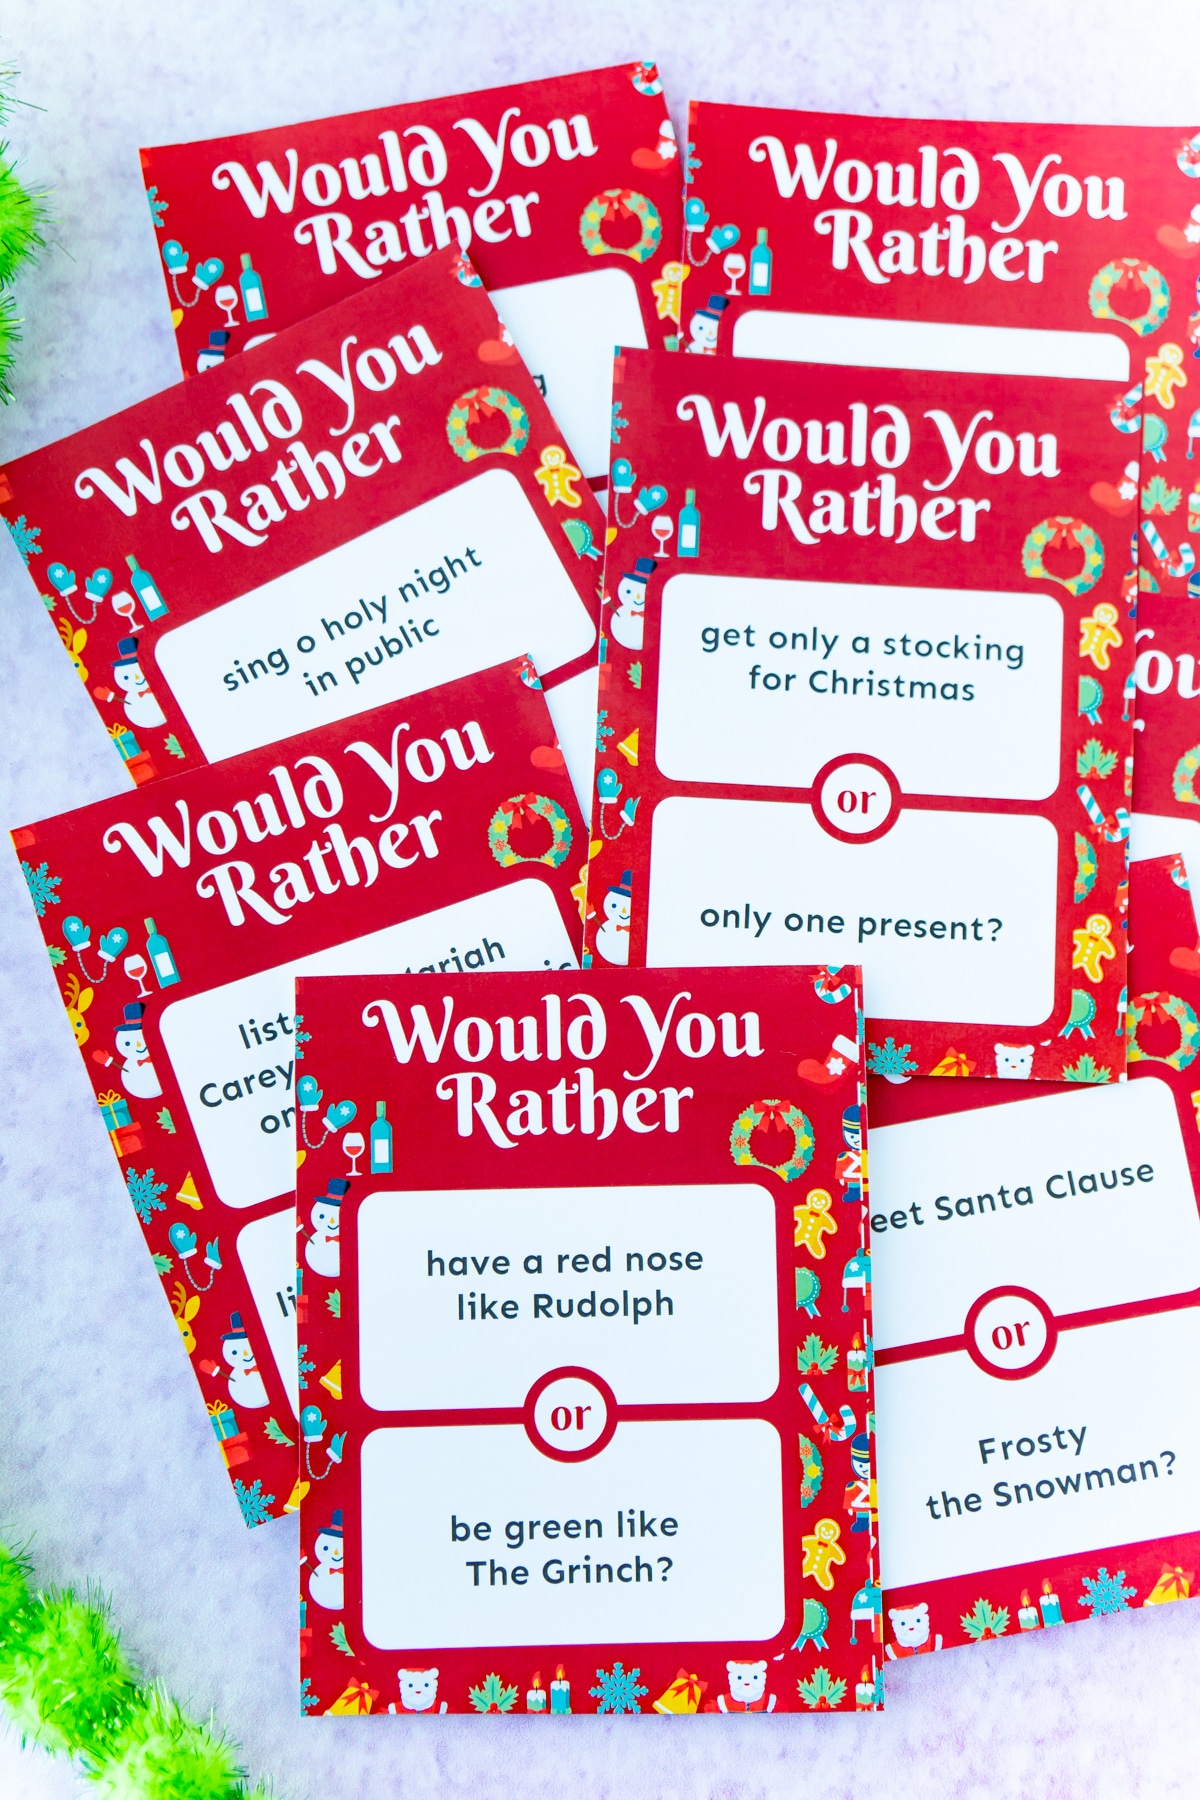 Christmas would you rather questions in a pile